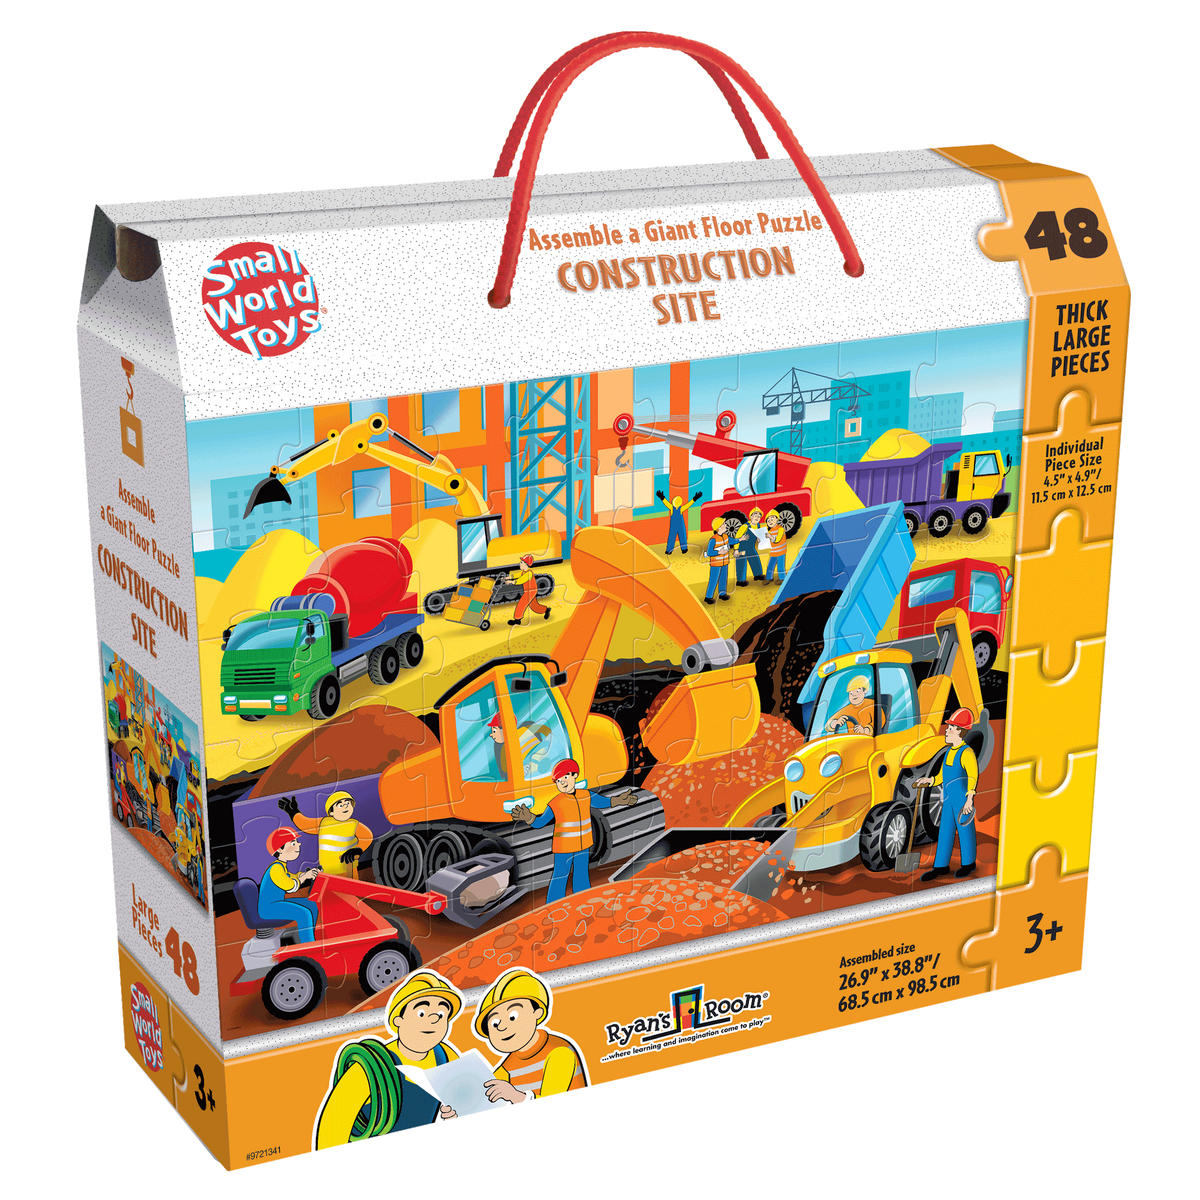 Small World Toys Construction Site Floor Puzzle - 48 Piece-SMALL WORLD-Little Giant Kidz